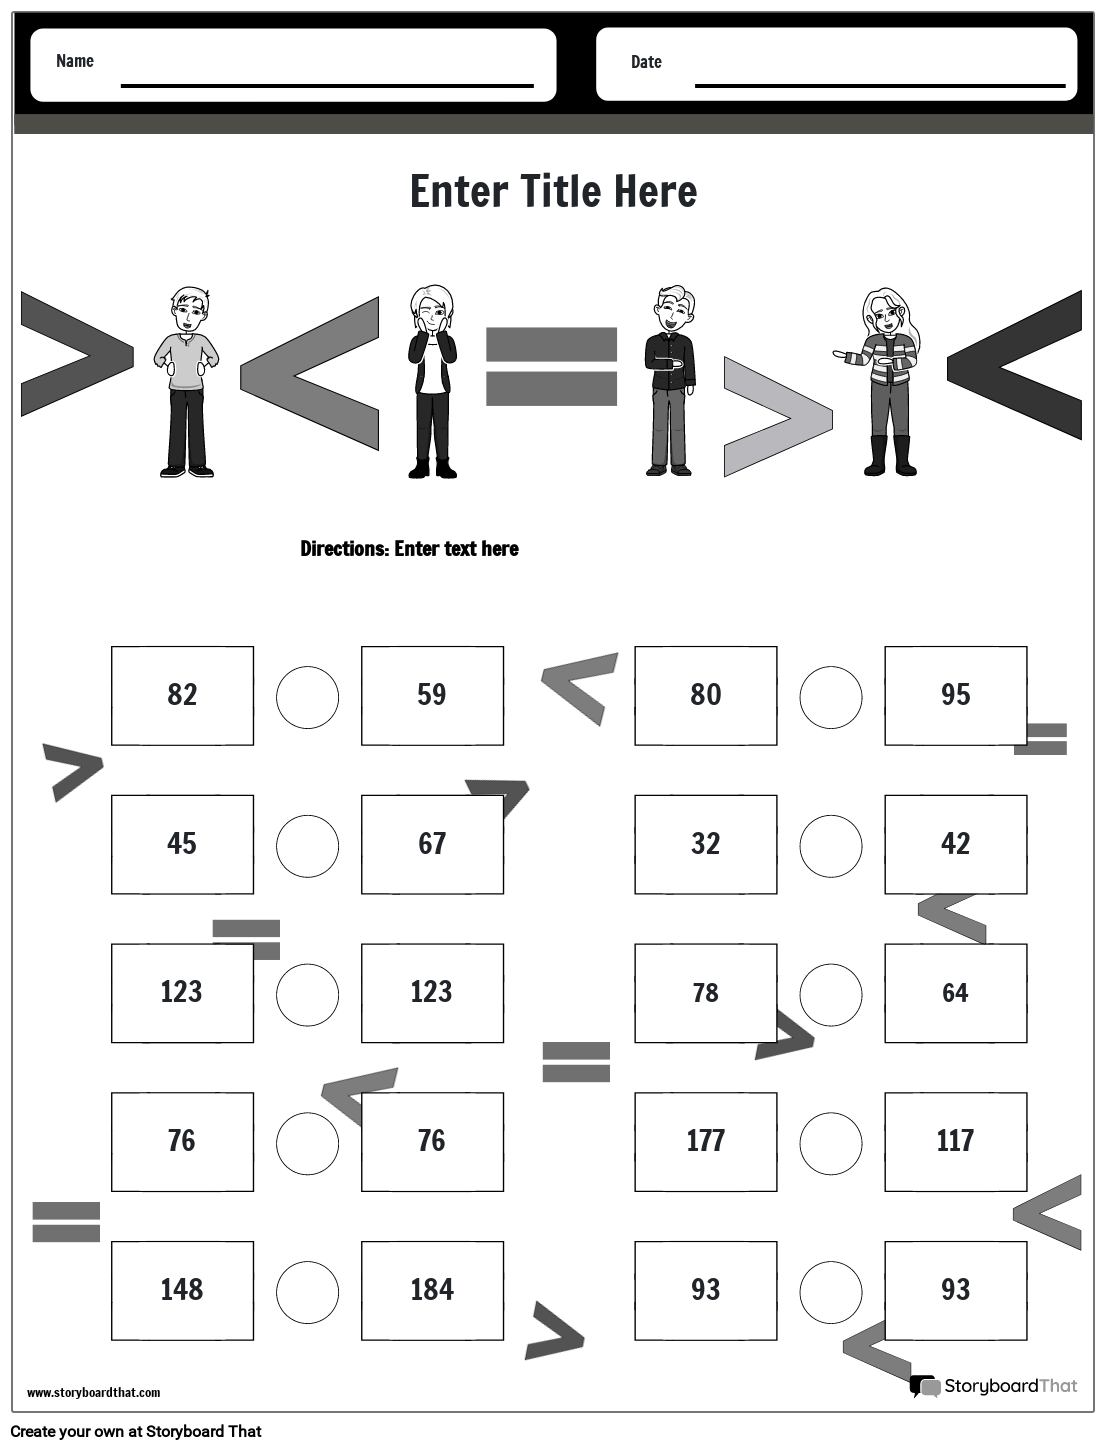 Print-ready Comparing Numbers Worksheet with Signs B&W